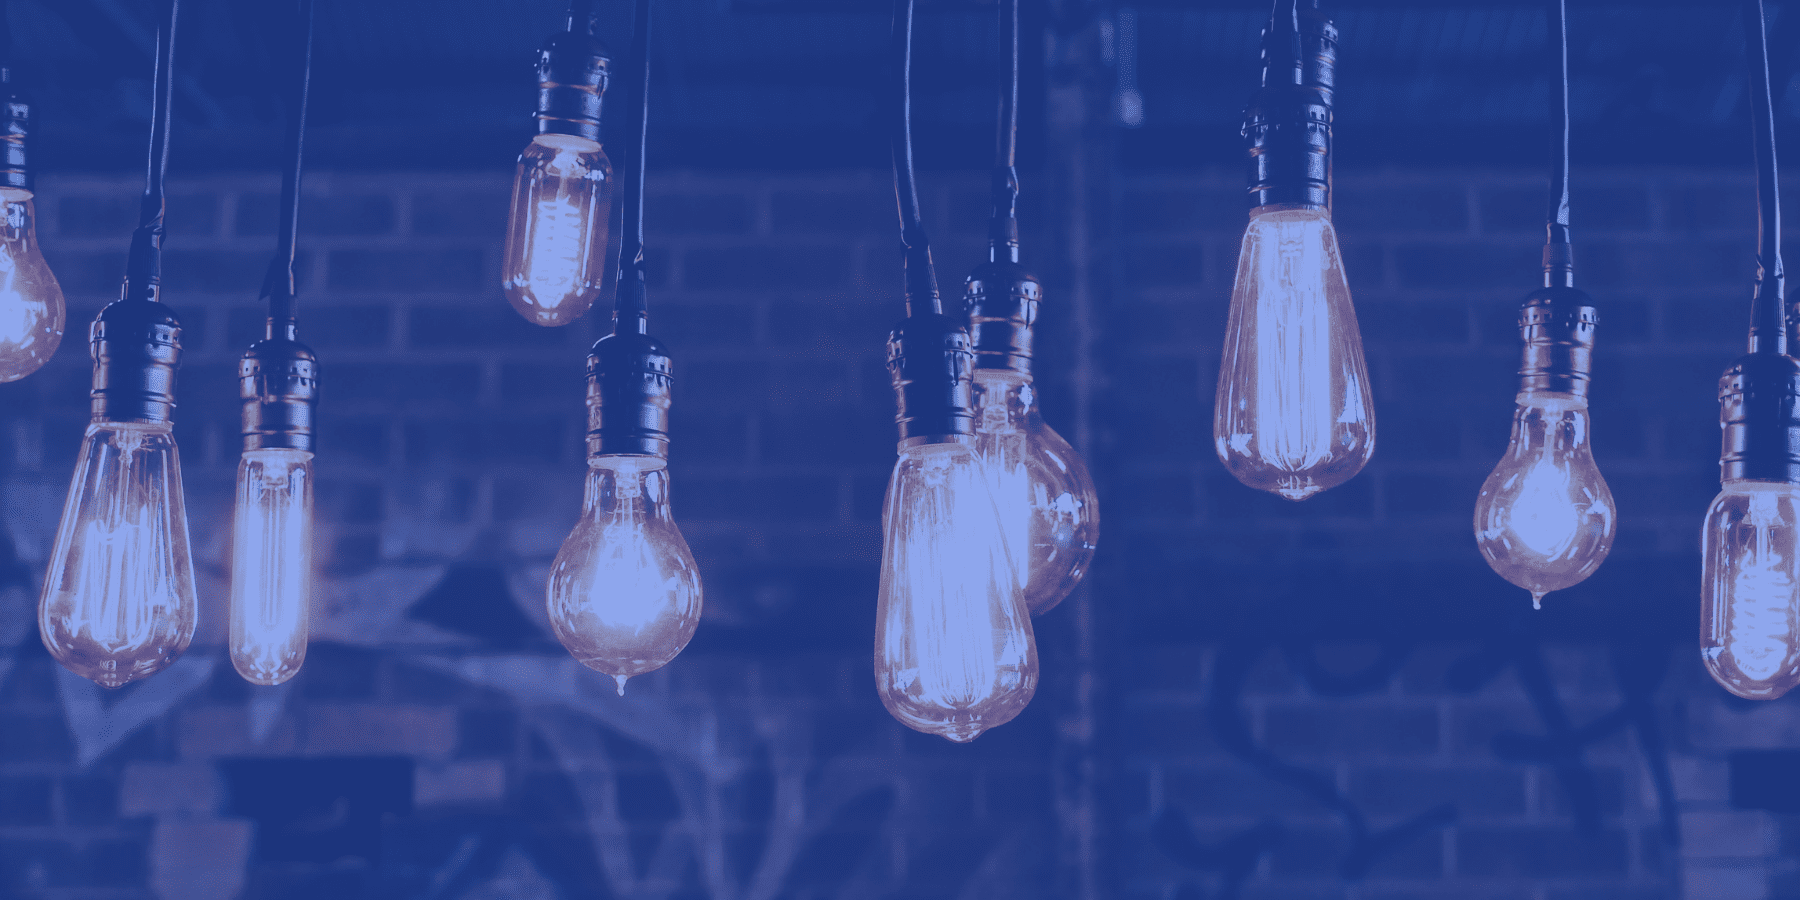 Lightbulbs hanging in a row from the ceiling with roboyo logo overlay